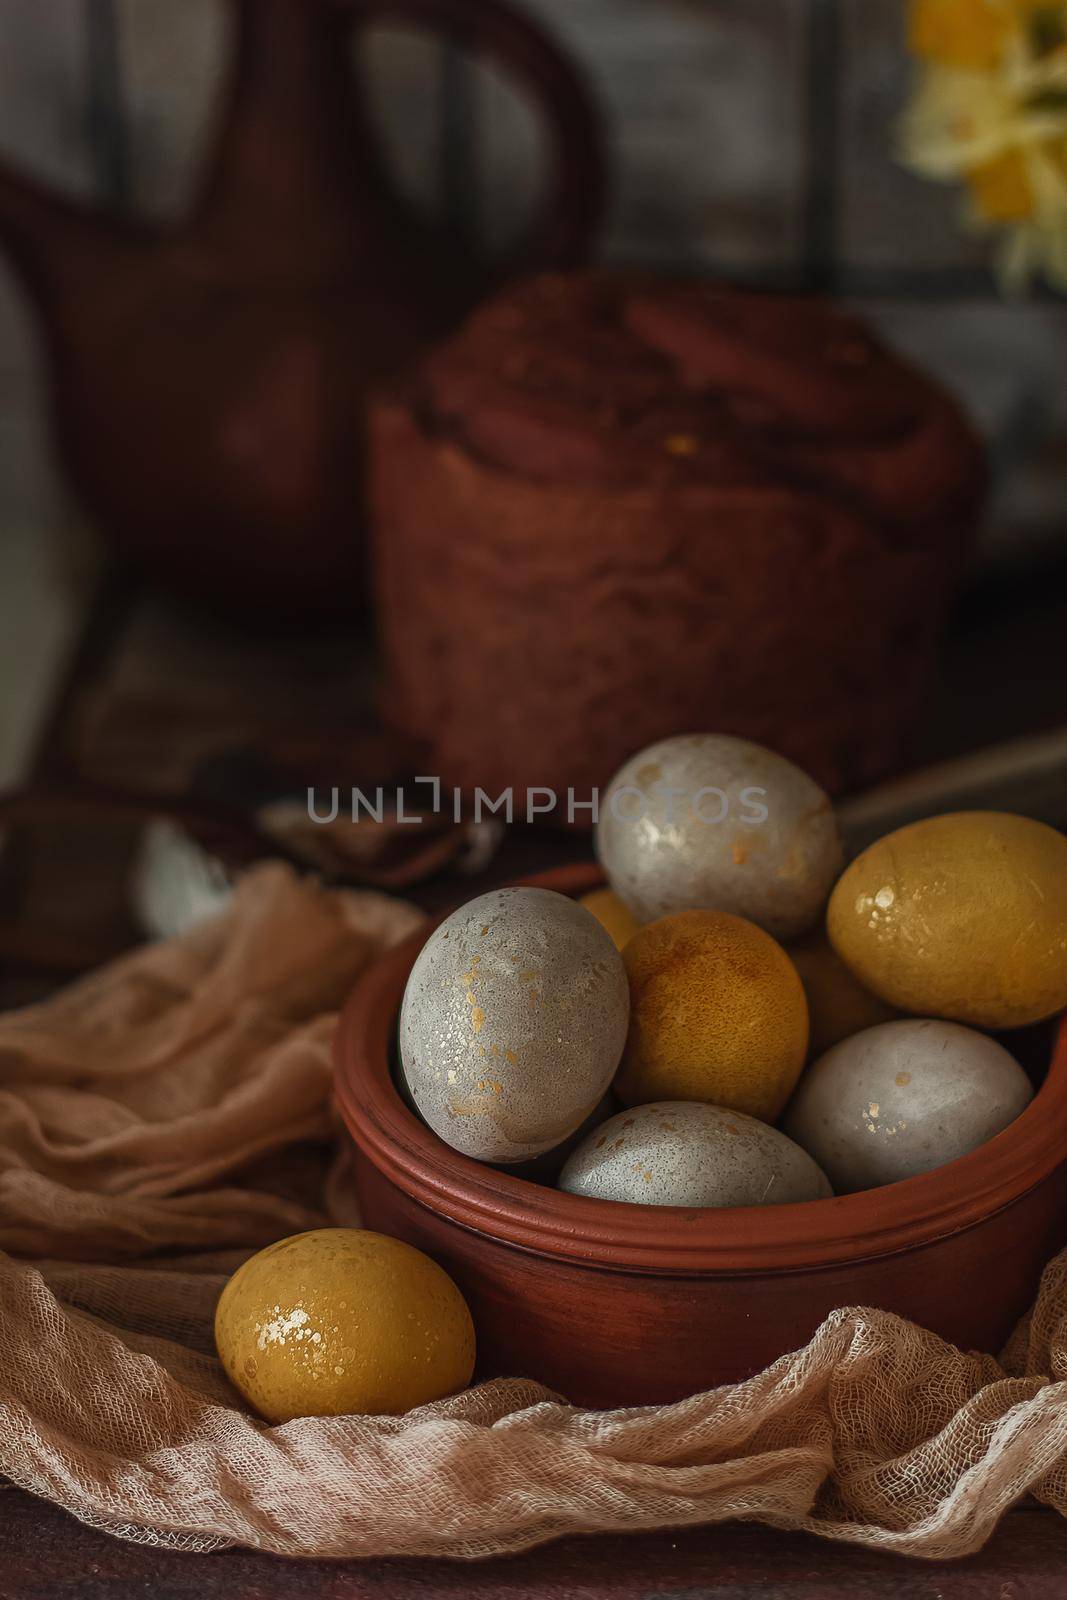 Natural dye for Easter eggs - turmeric on vintage wooden background by mmp1206